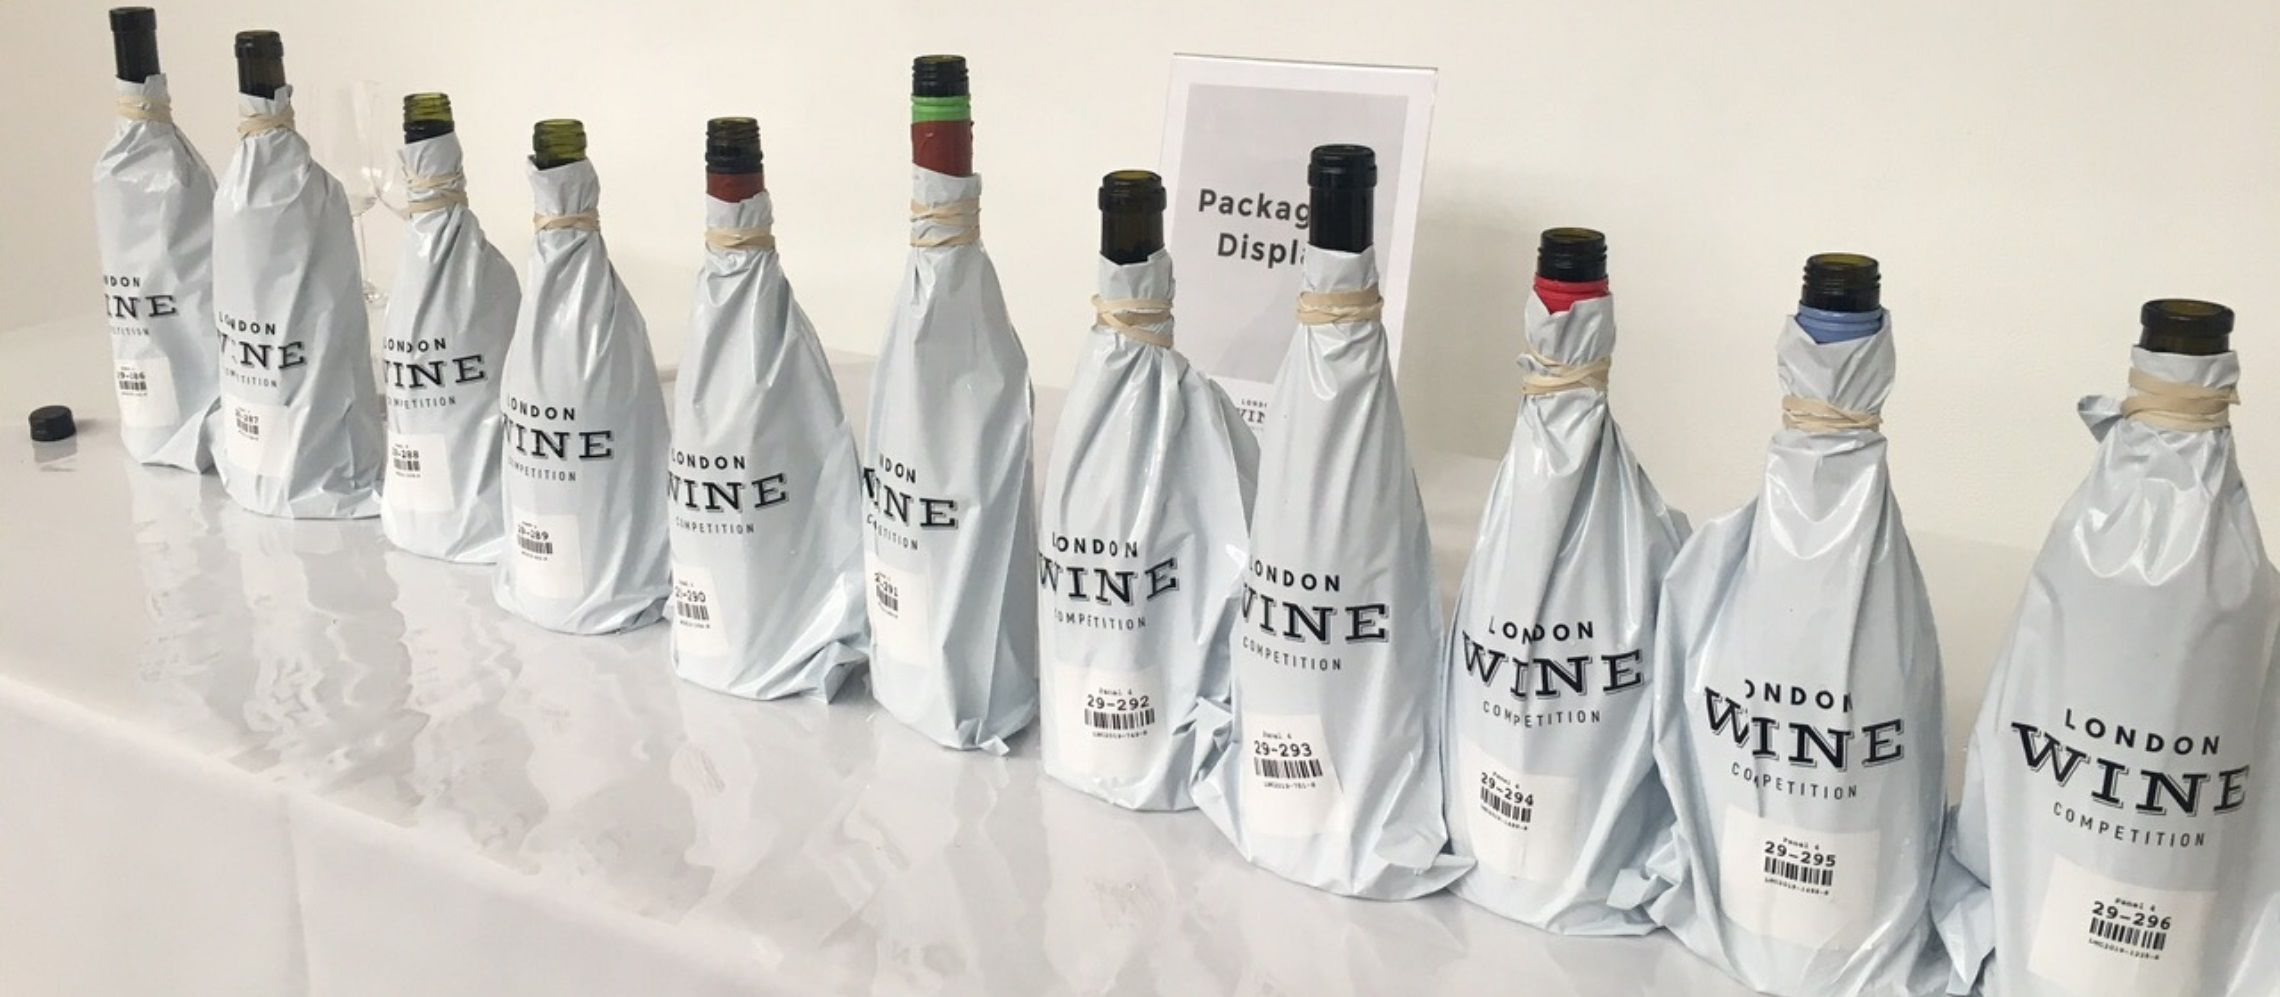 Photo for: 2021 London Wine Competition Winners Announced